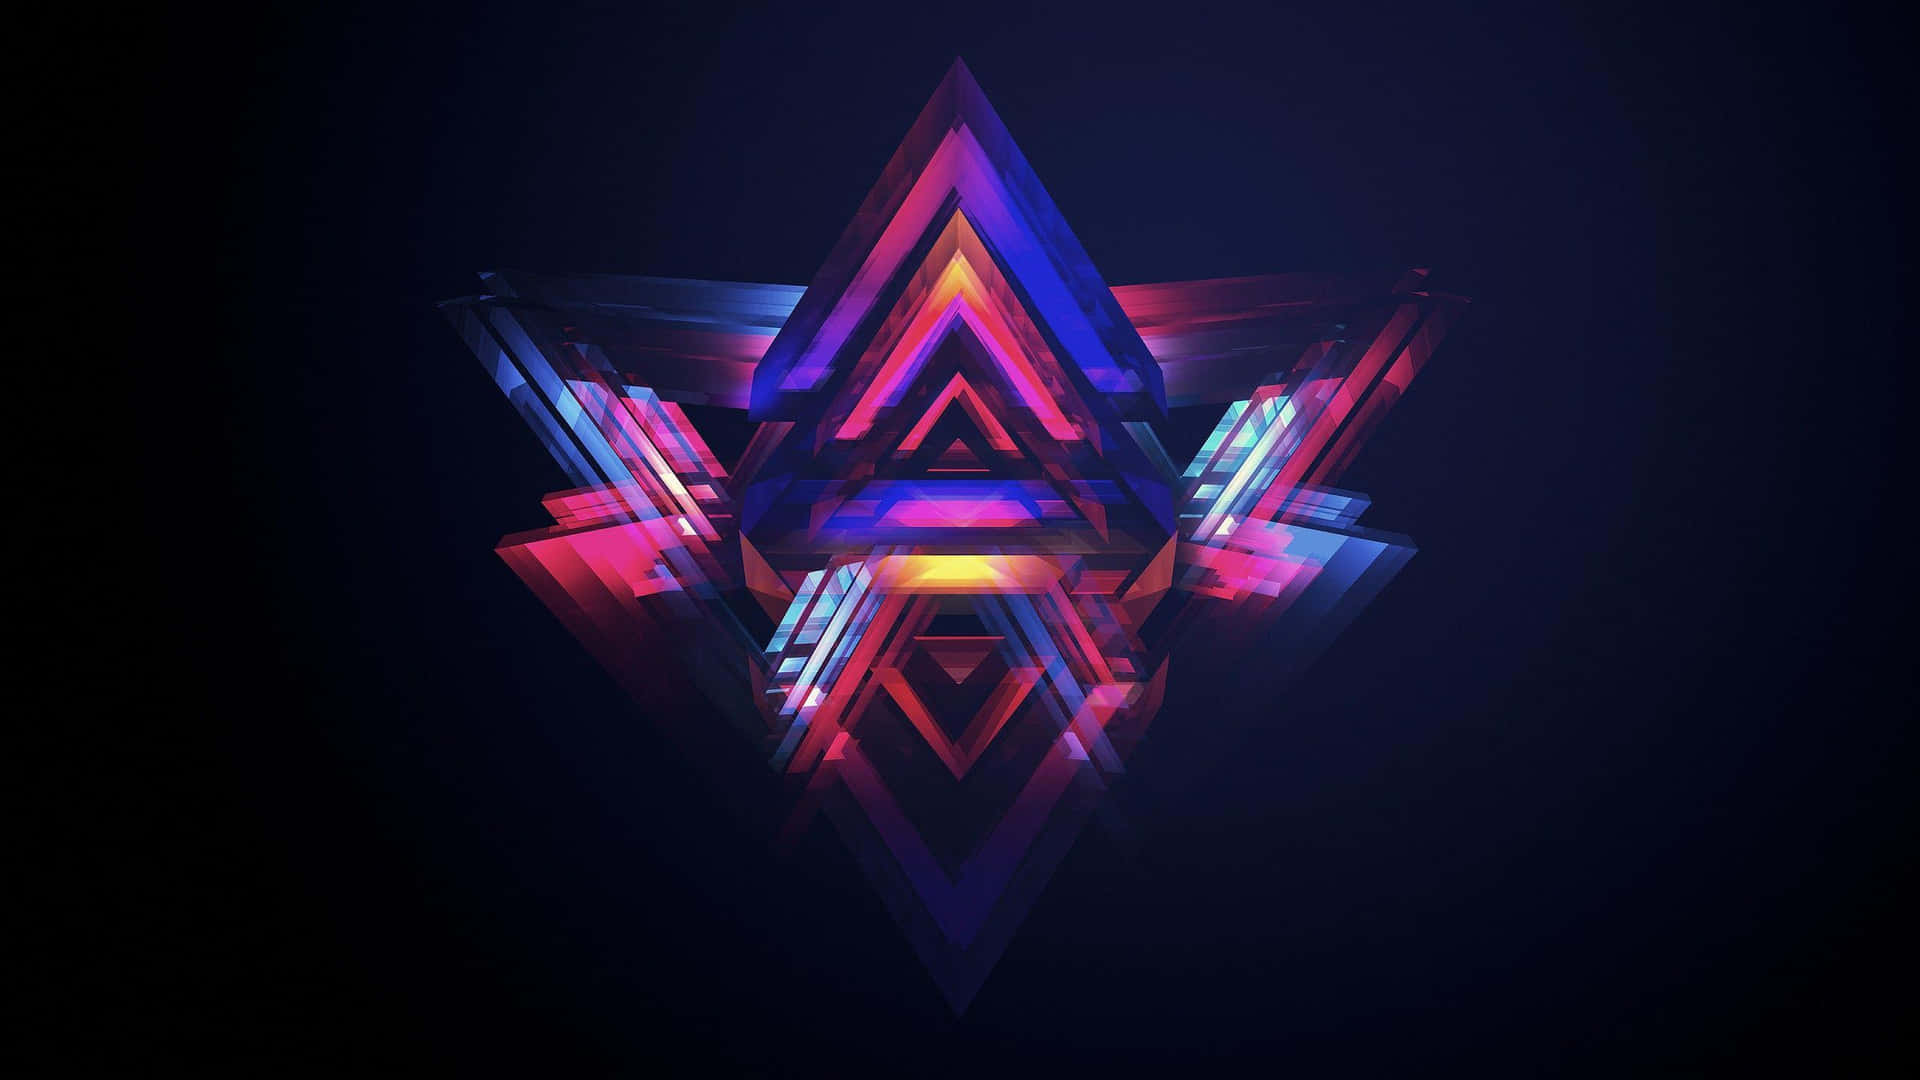 A Colorful Abstract Design With A Triangle In The Middle Wallpaper